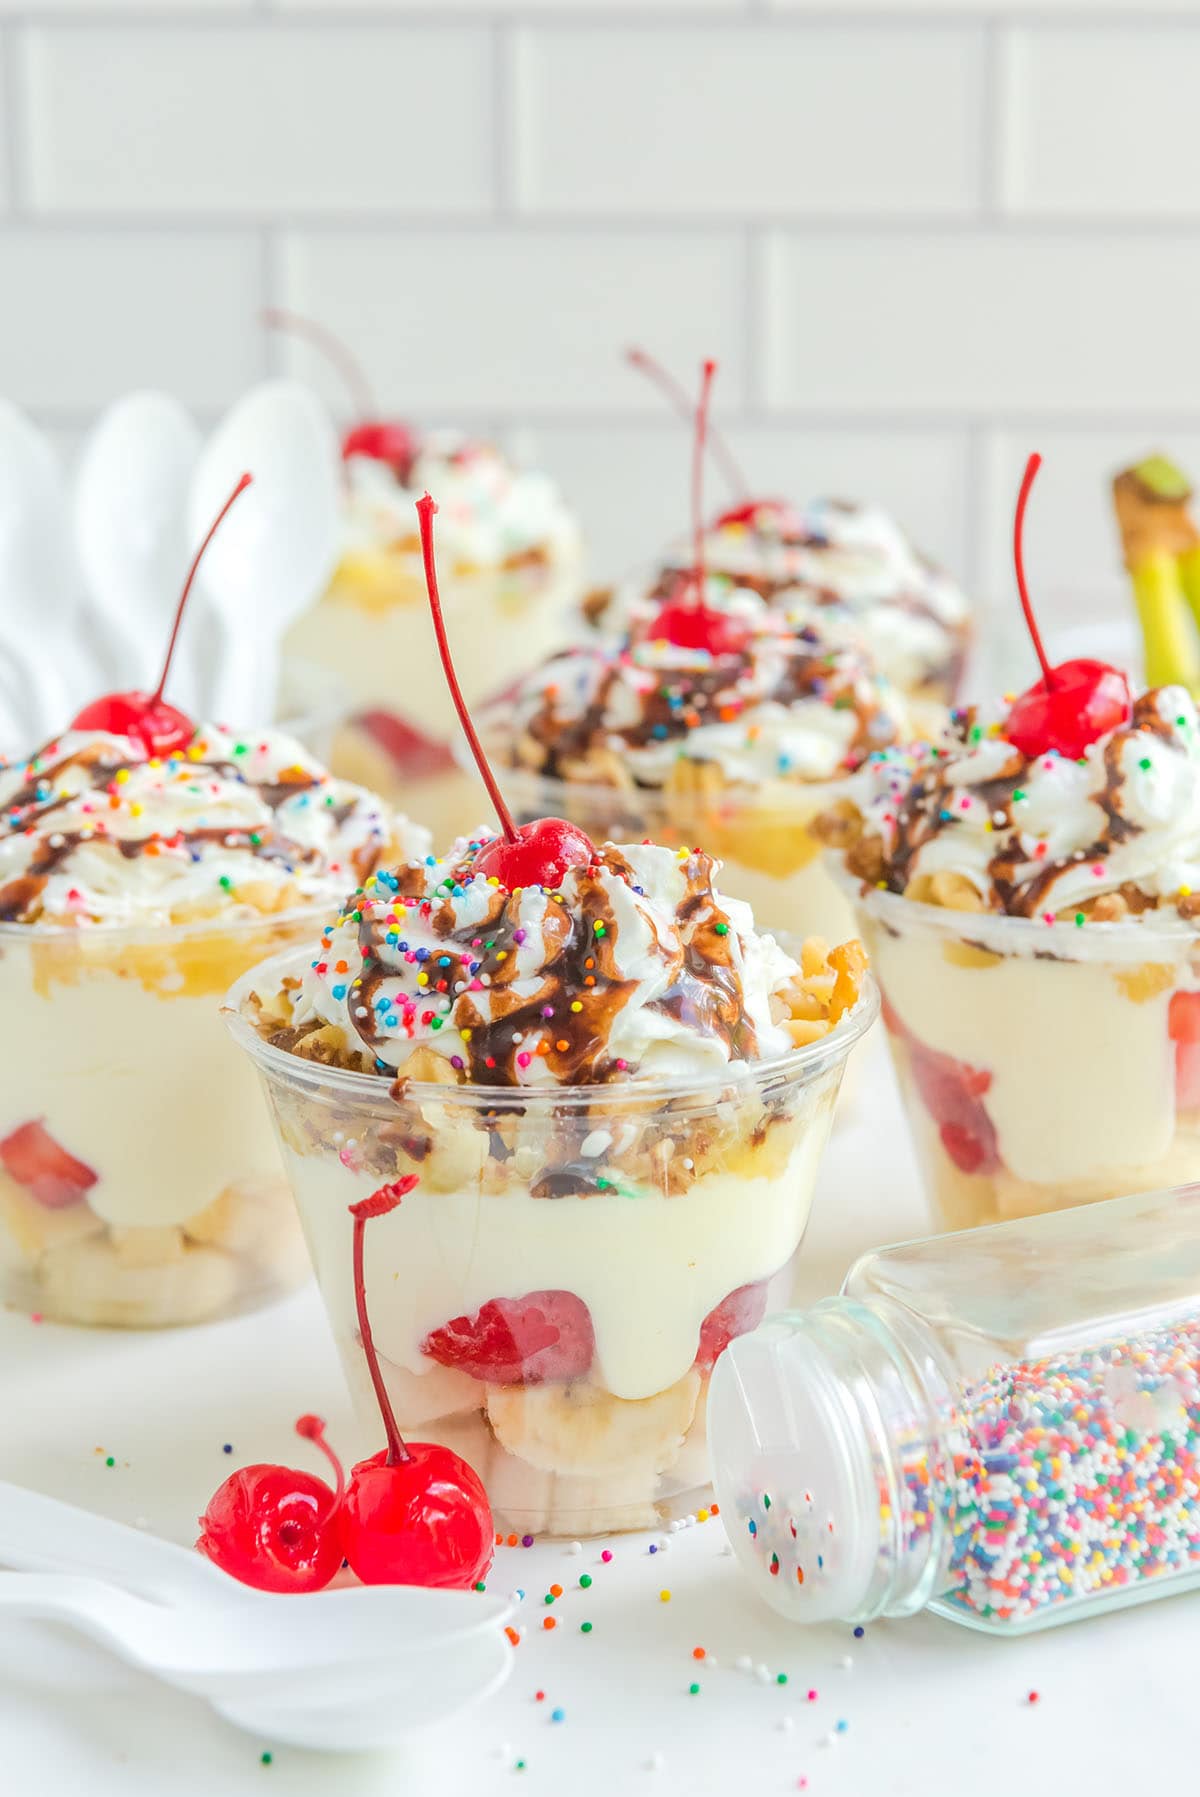 Banana Split Pudding Cups with cherries on top